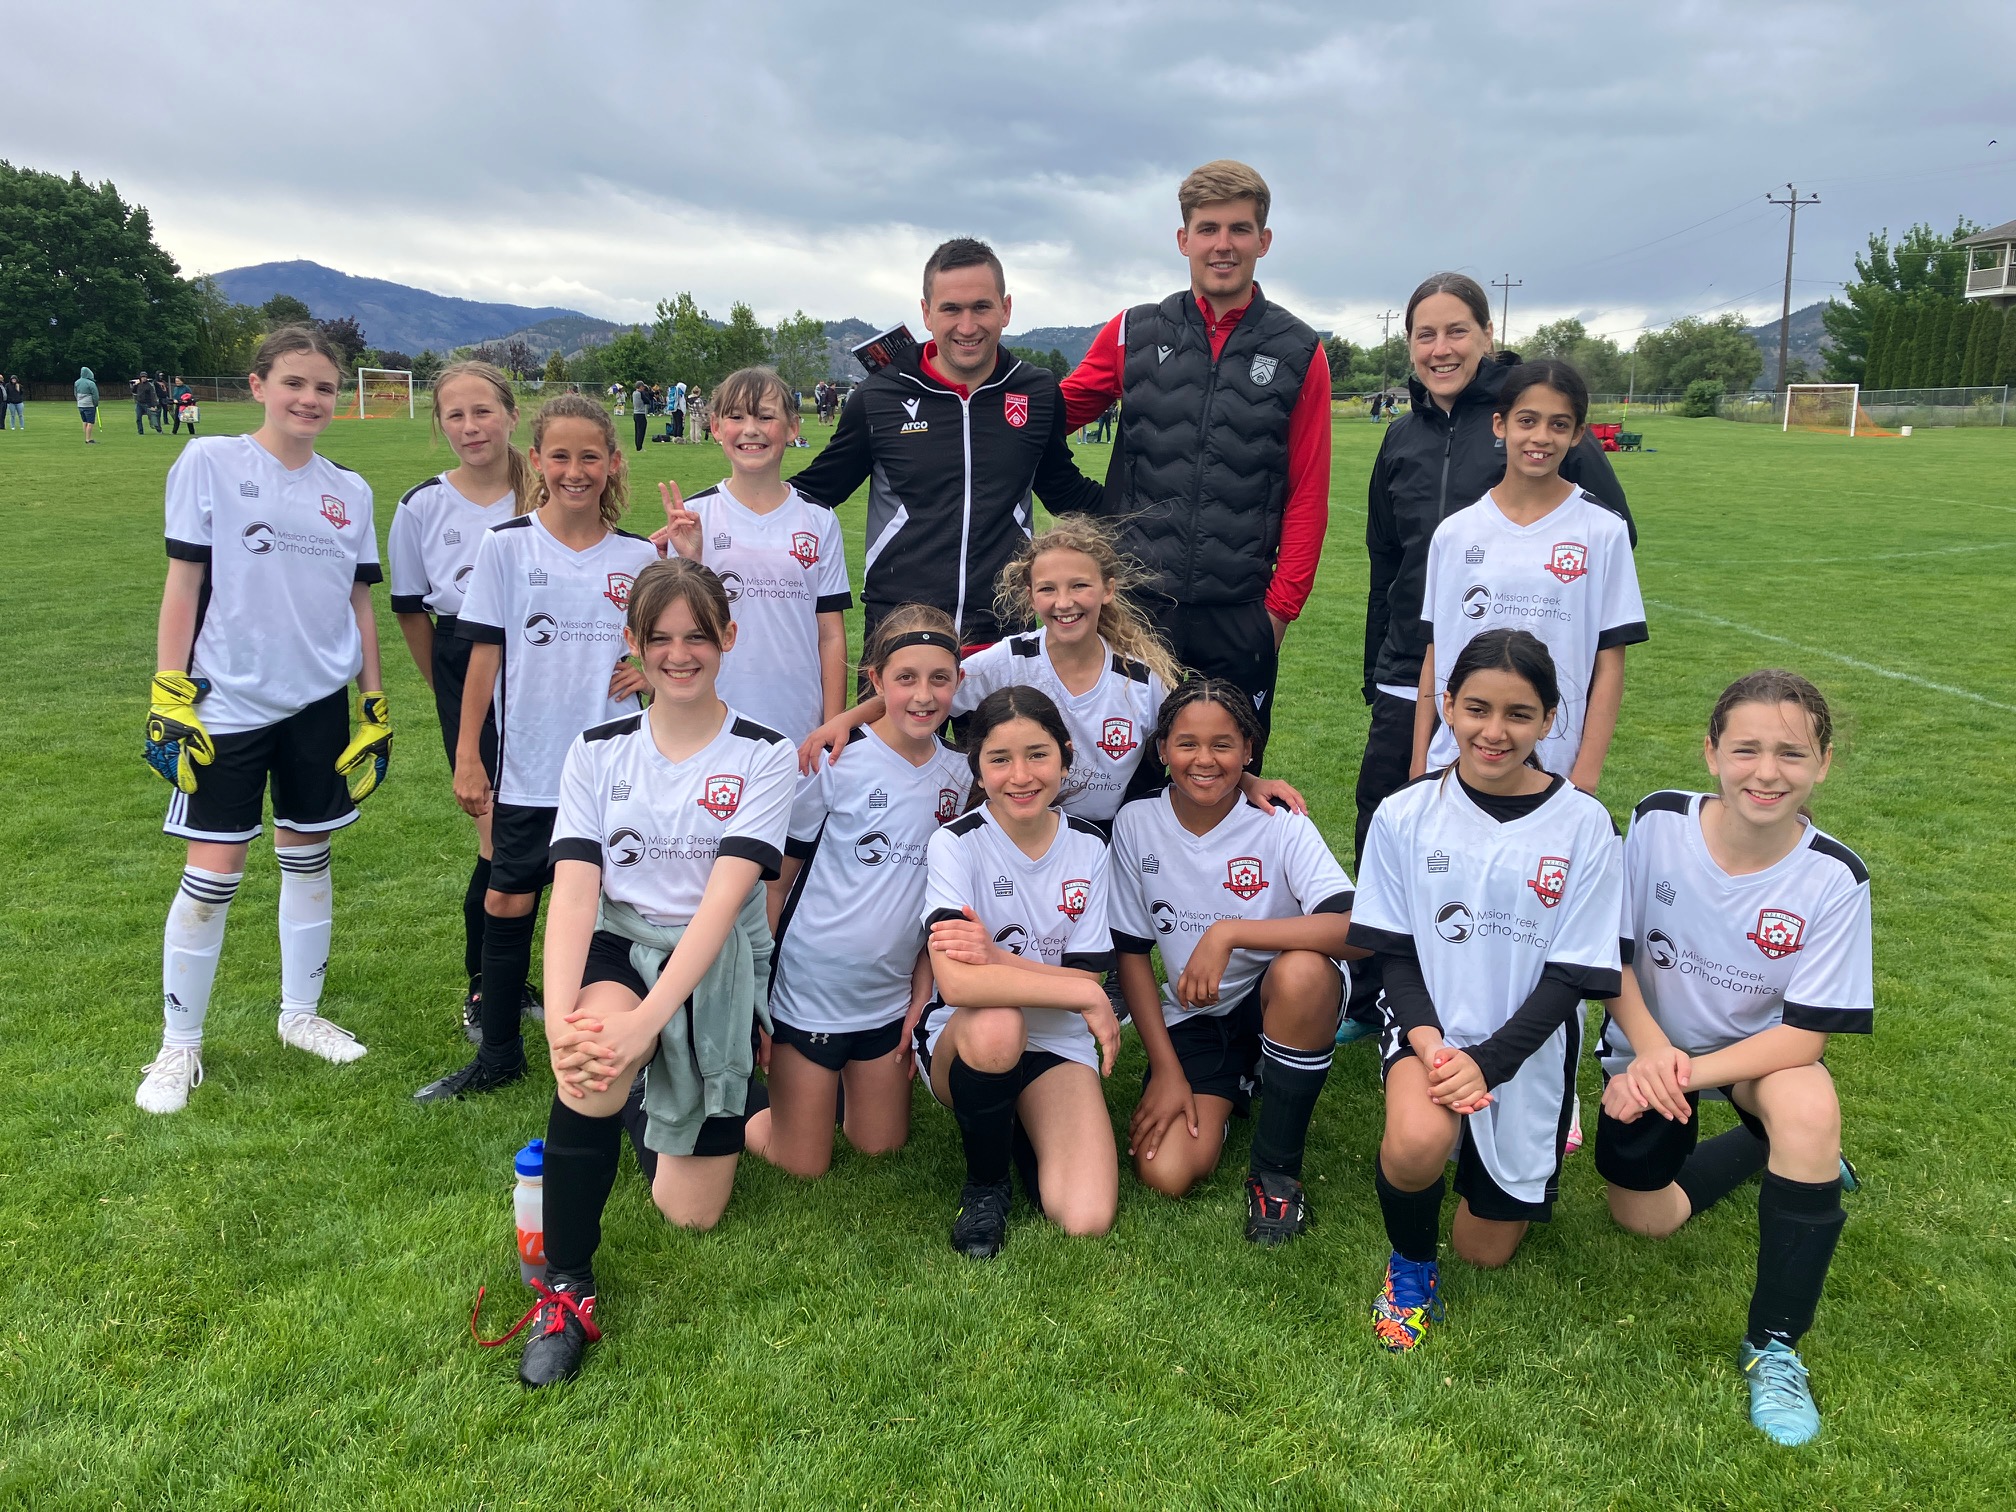 U12 Girls Team - the weekend the CPL came to watch them play!